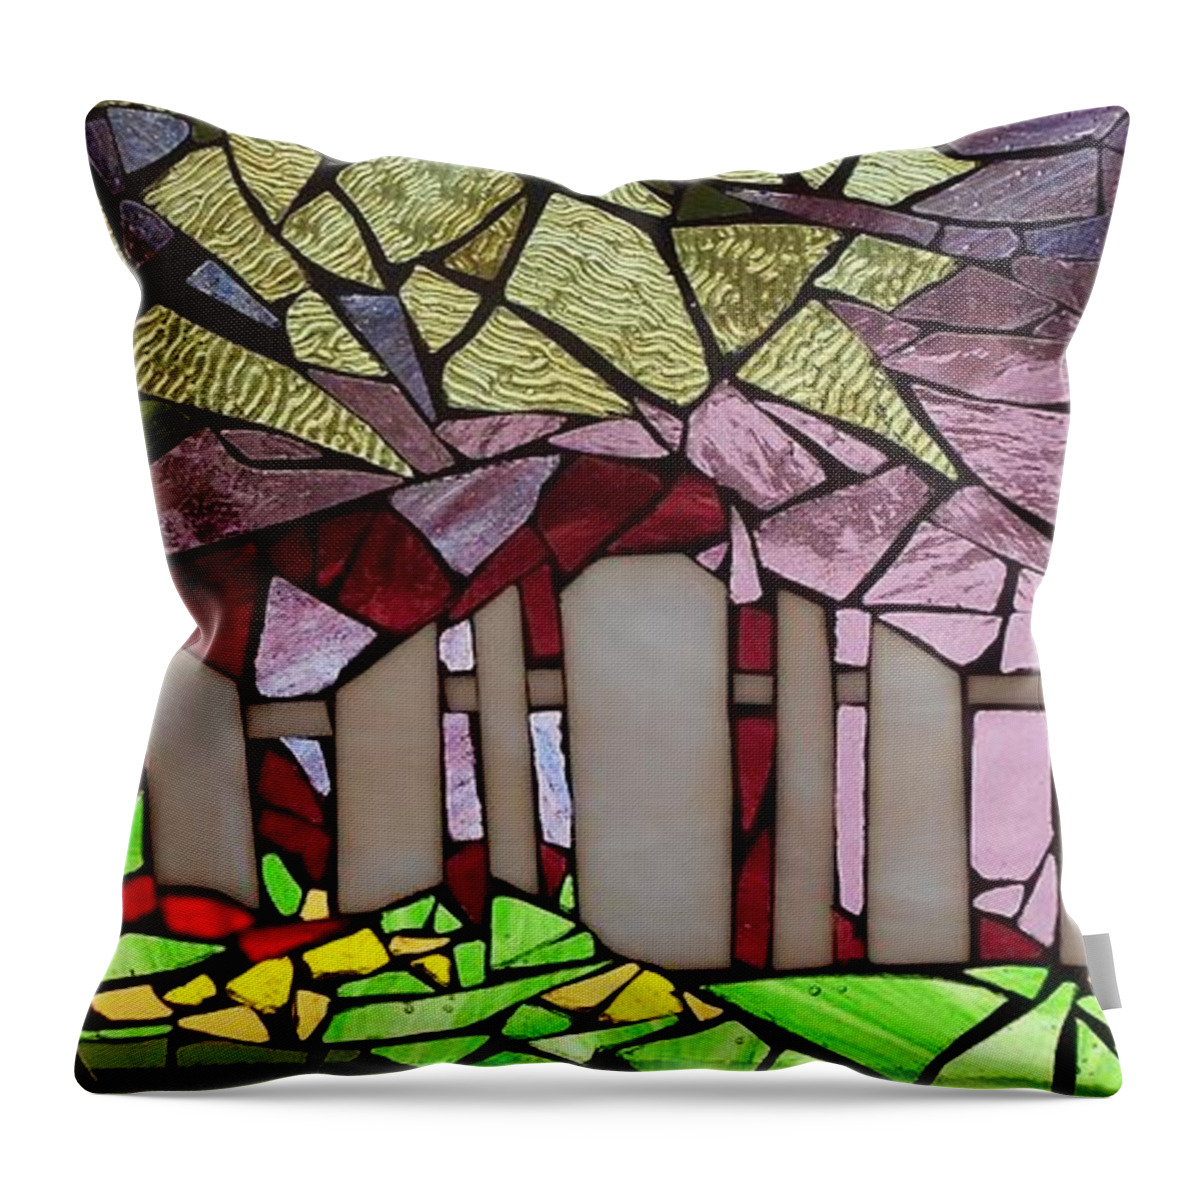 Fence Throw Pillow featuring the glass art Mosaic Stained Glass - The Garden Fence by Catherine Van Der Woerd